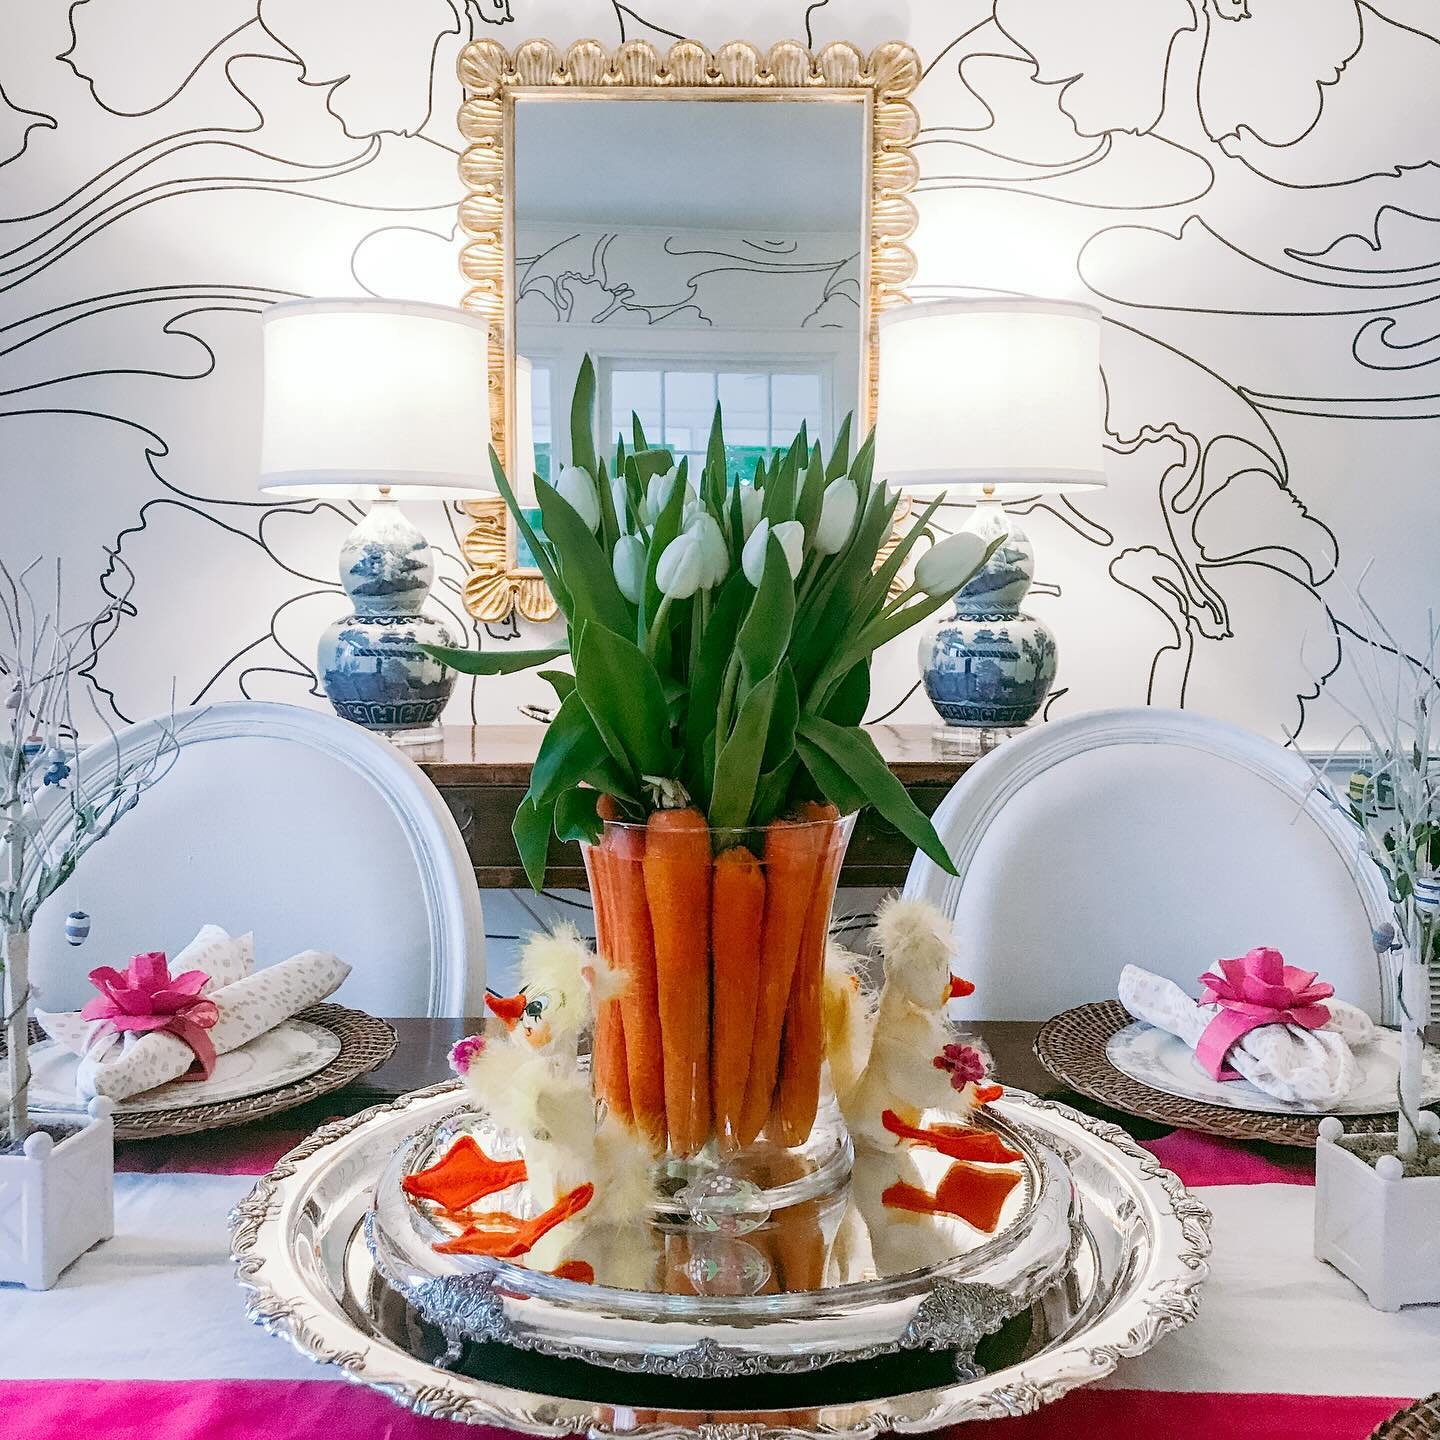 Happy Palm Sunday 🌴 I hope your week is filled with joy and family as we prepare for Easter Sunday, and the blessings of hope and light ahead! 🩷
For the past few years, I&rsquo;ve made this centerpiece of carrots and flowers.  Even this year, Sarah